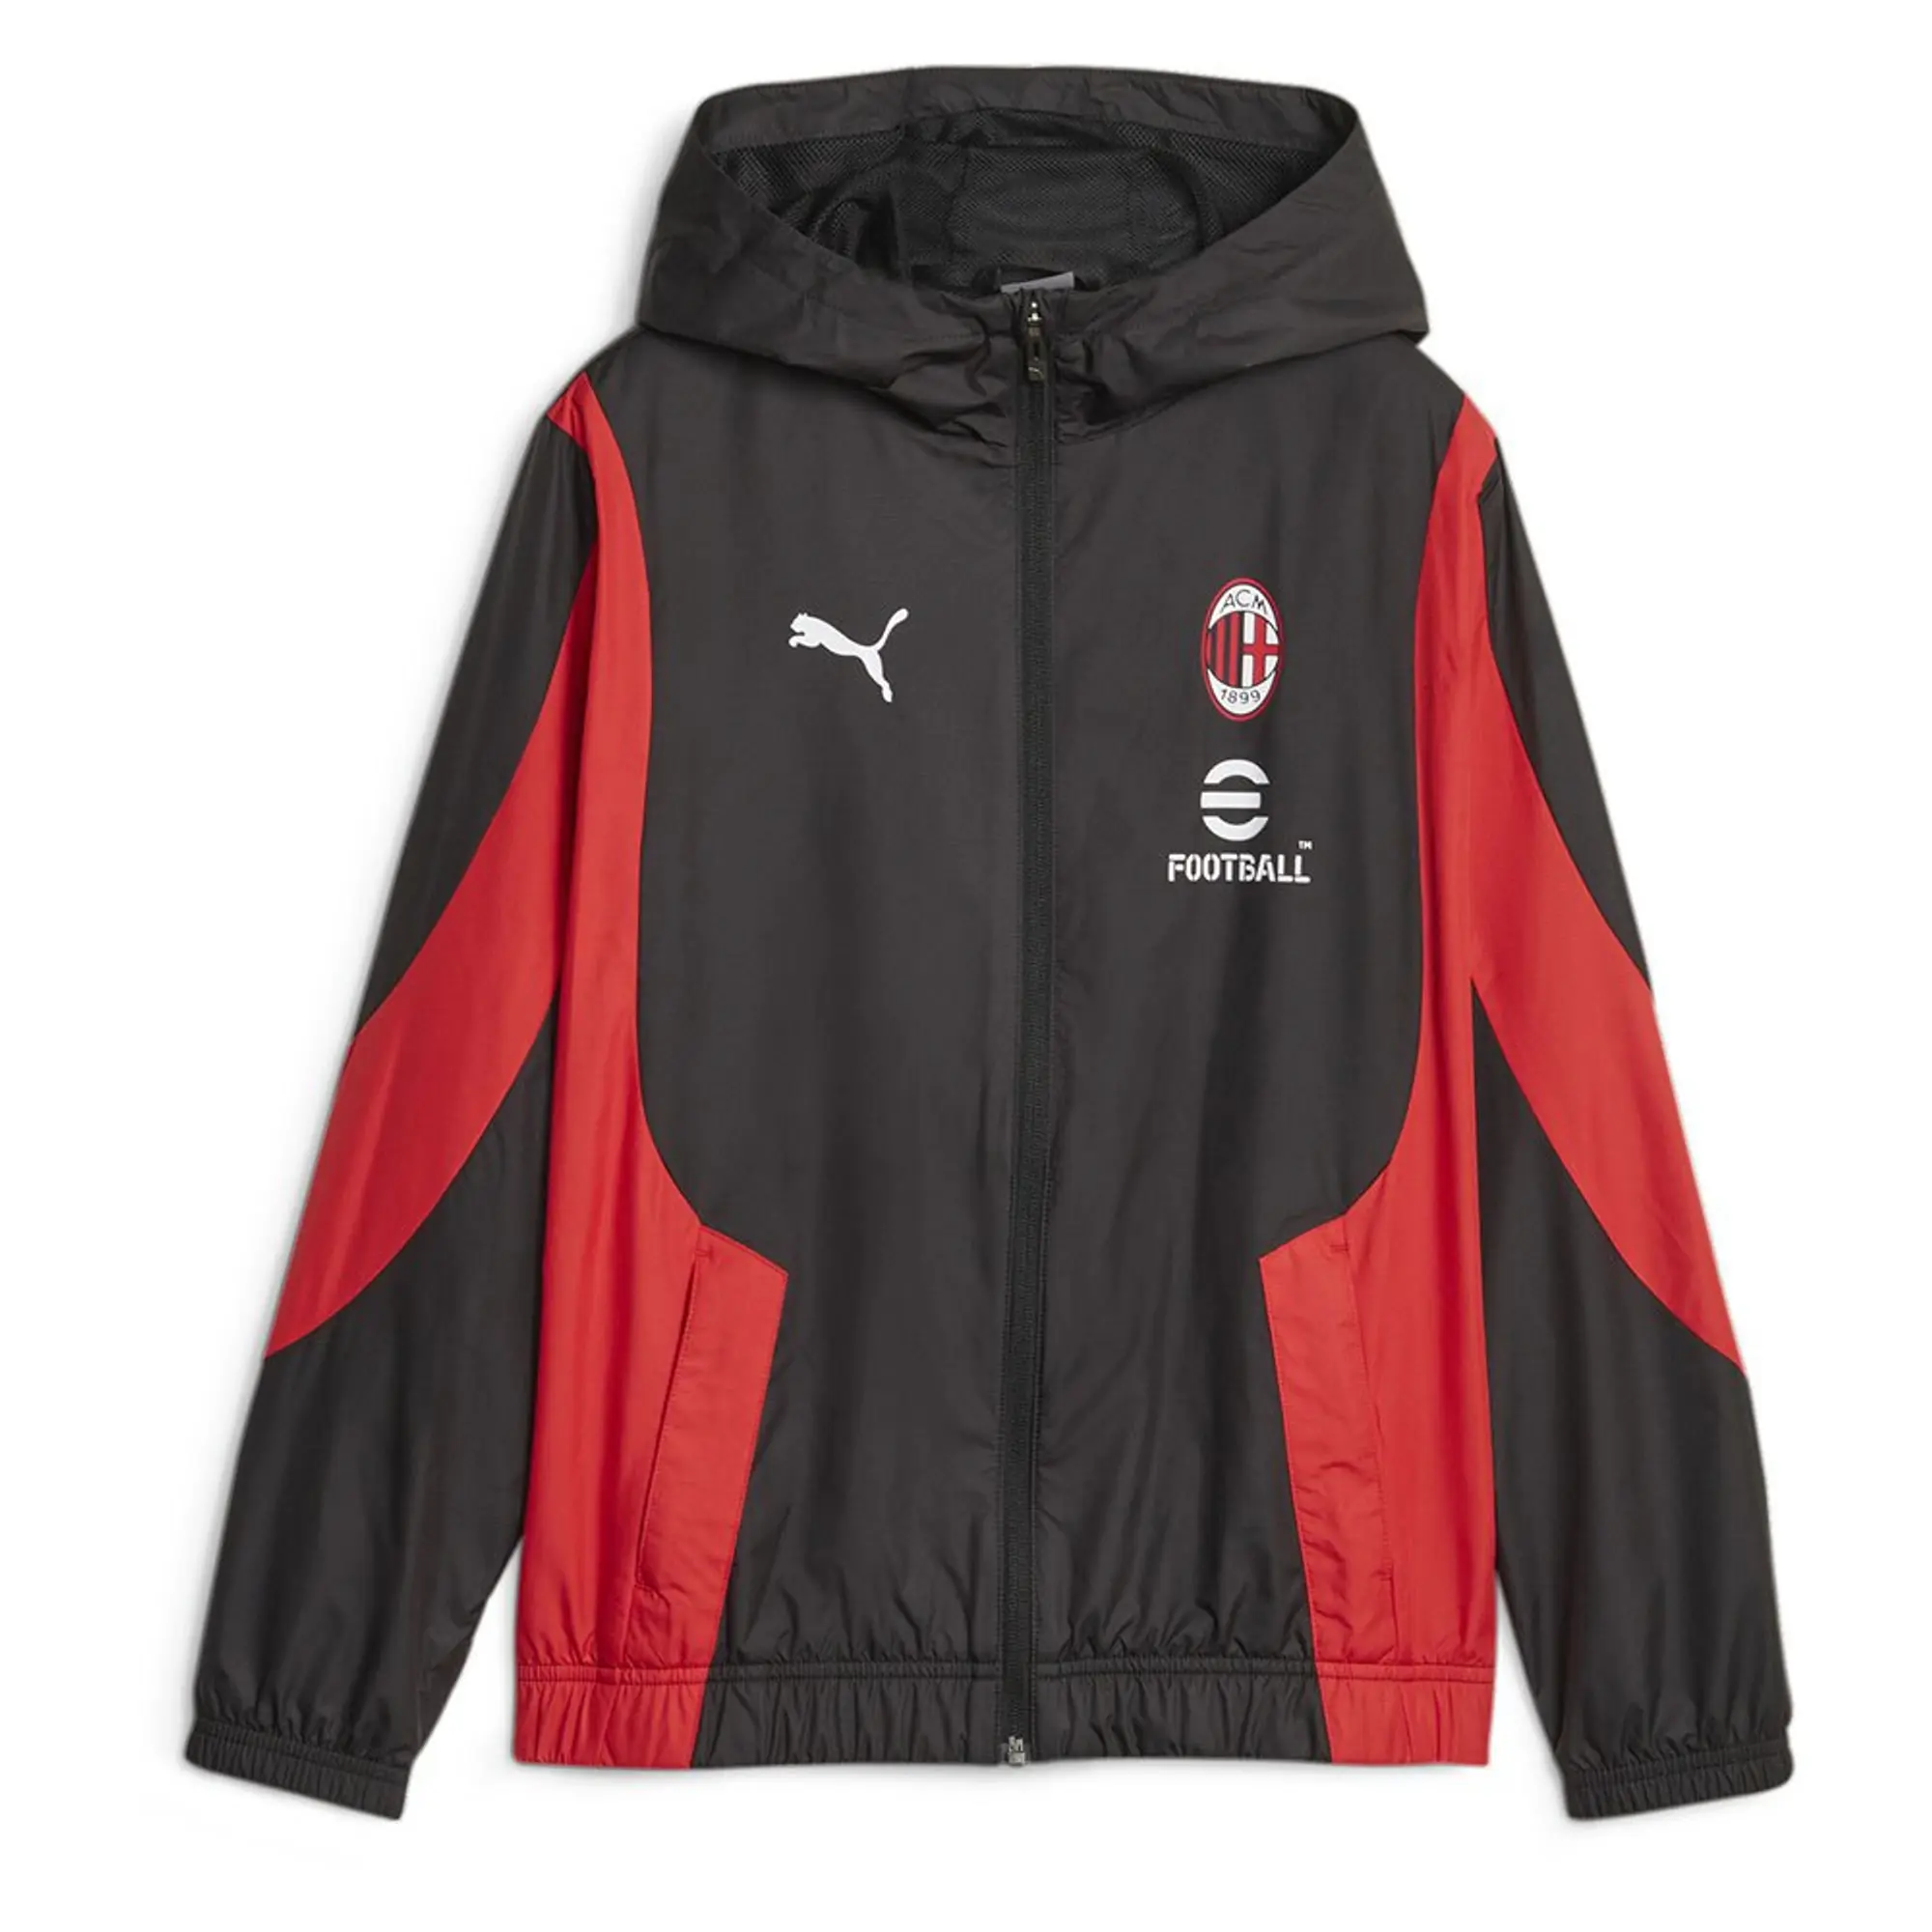 PUMA AC Milan Youth Prematch Football Jacket, Black/For All Time Red